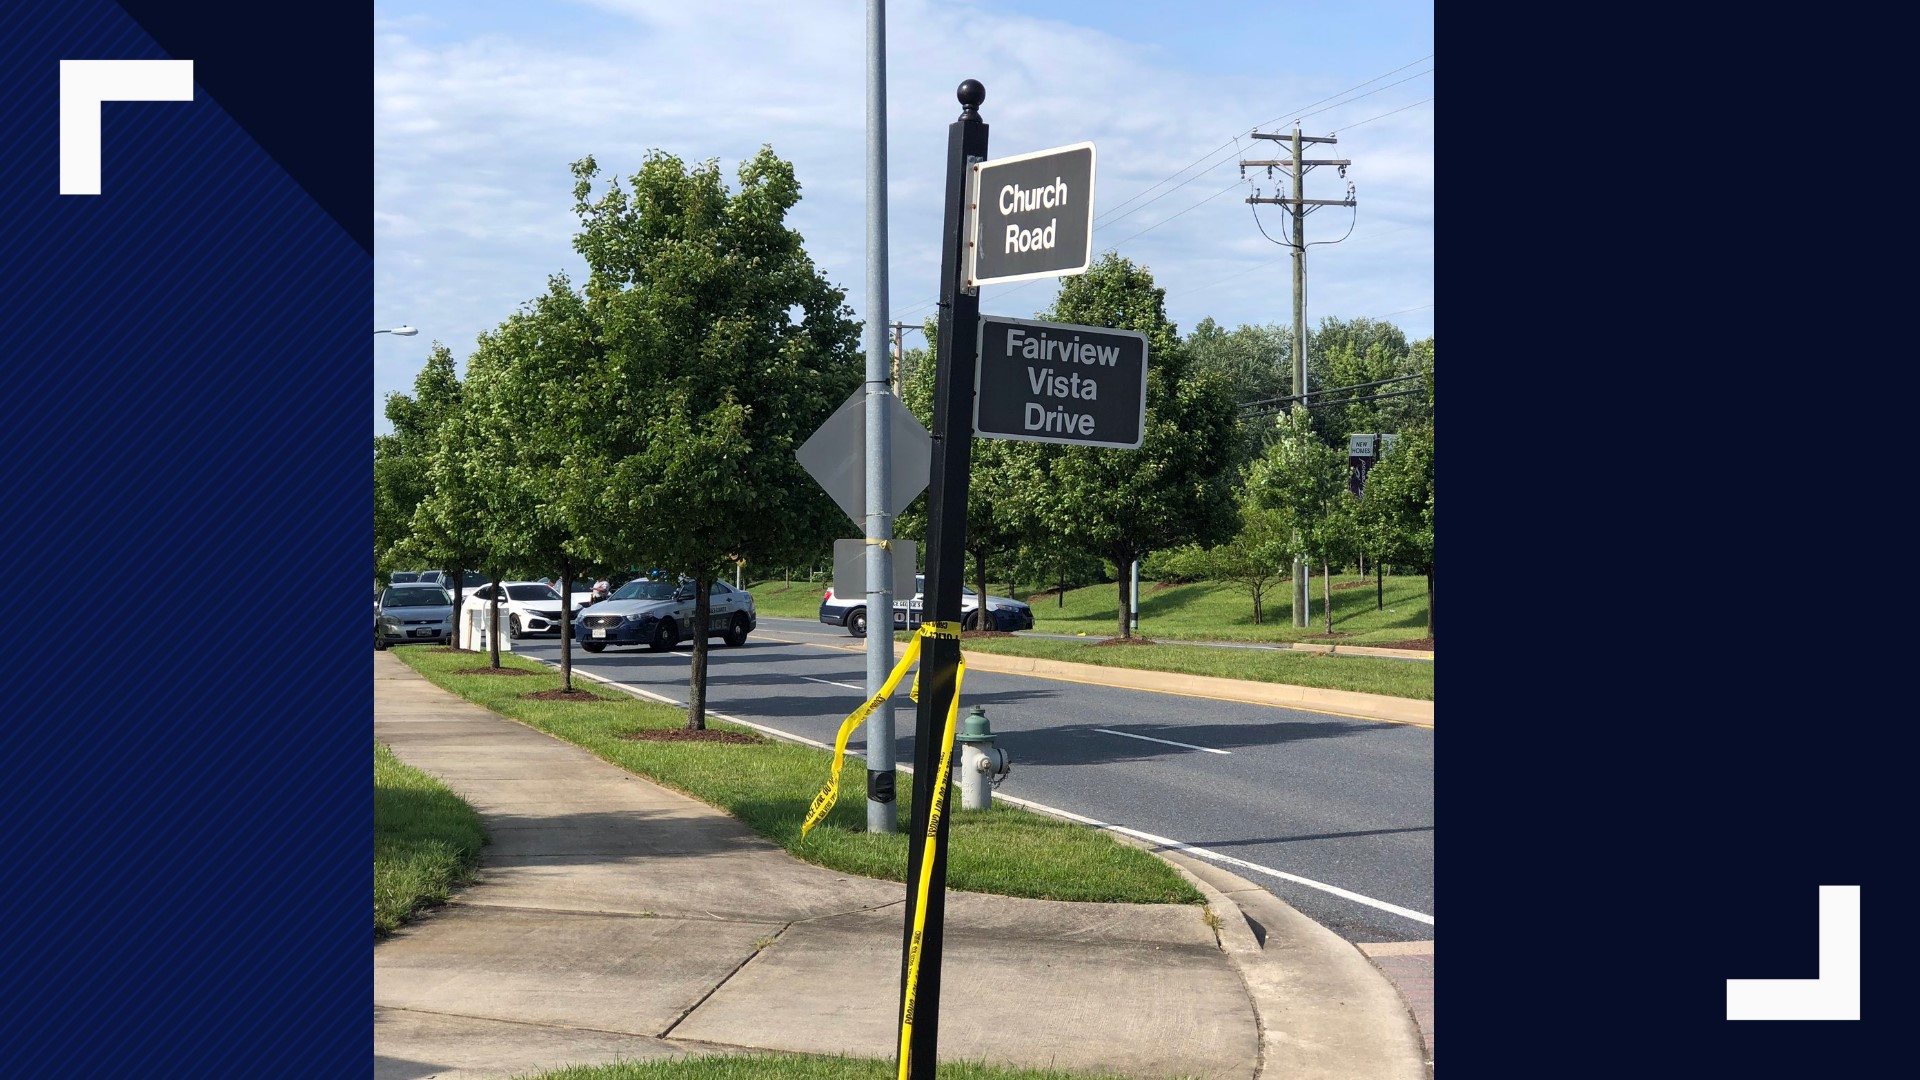 A young male has died after being hit by a car in Bowie, Prince George's County police said. The victim was hit as he was crossing the road at the intersection of Church Road and Fairview Vista Drive.